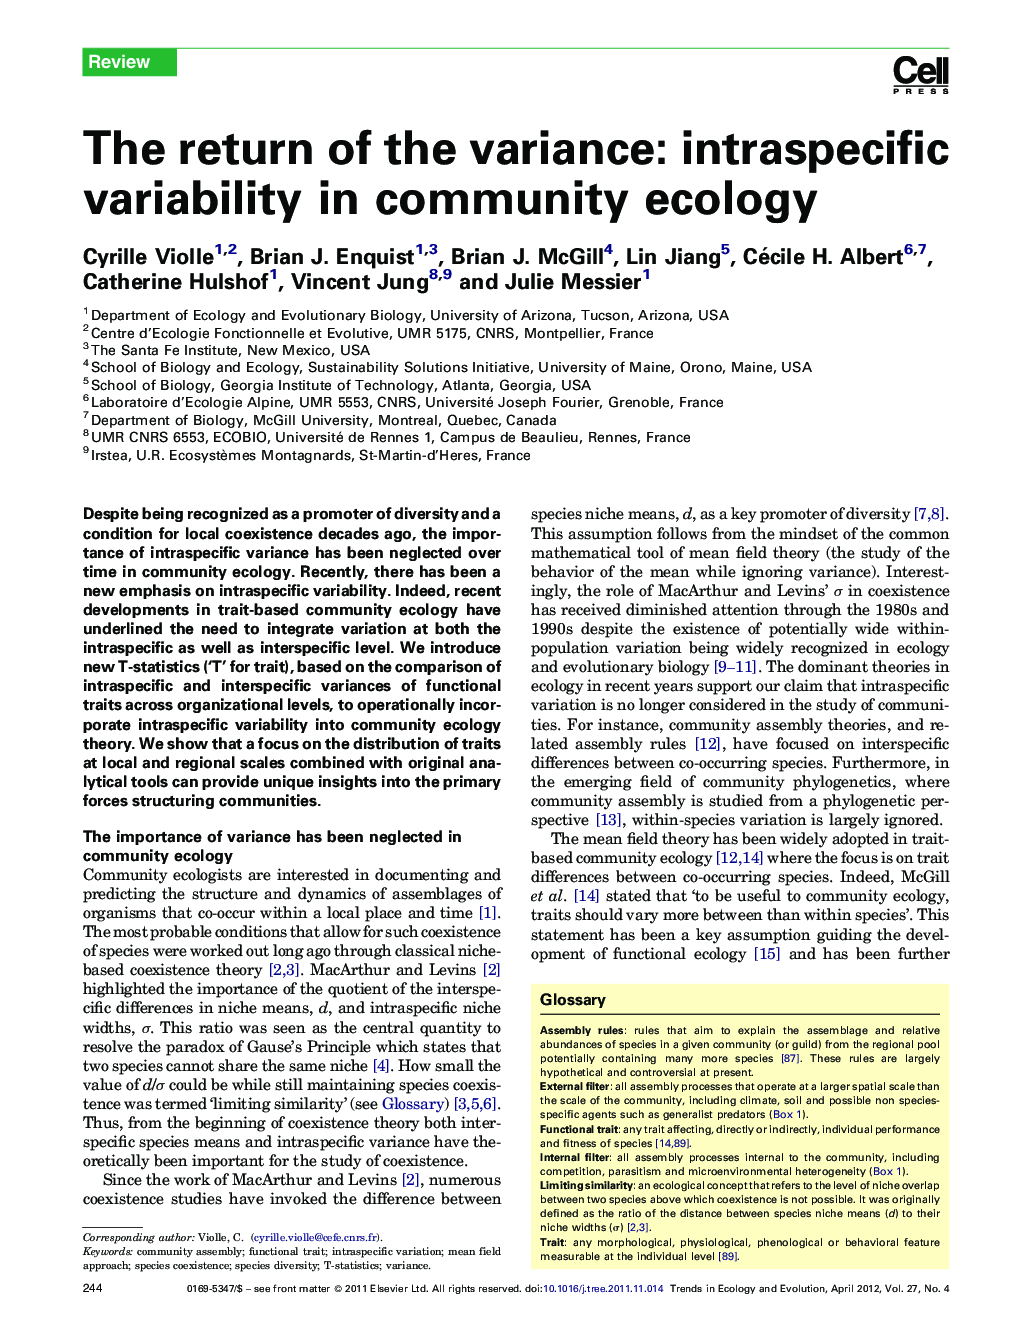 The return of the variance: intraspecific variability in community ecology